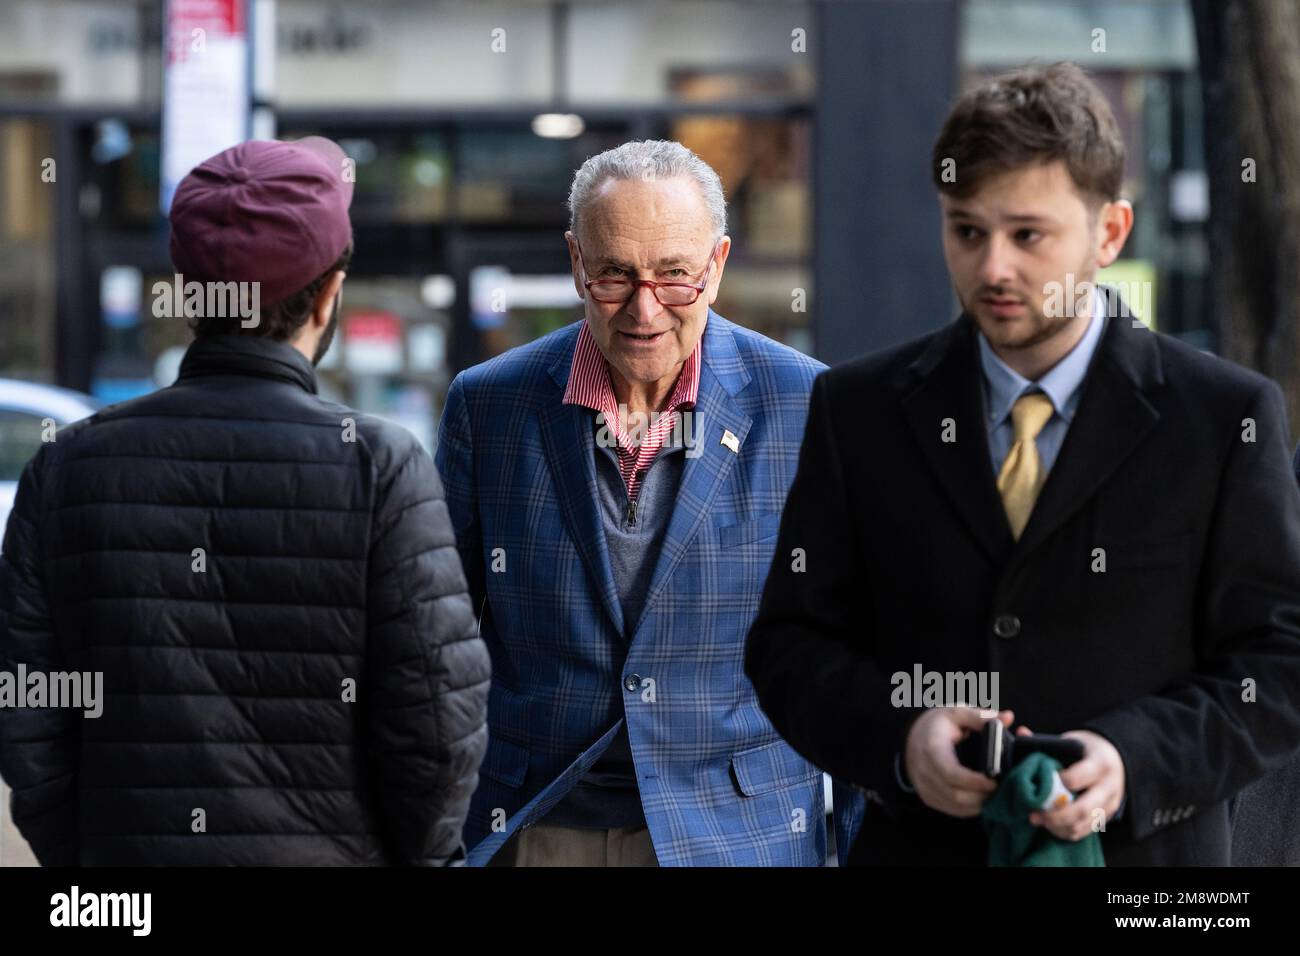 Senator Charles Schumer arrives for press briefing at lobby of 875 3rd avenue, New York on January 15, 2023 to push for confirmation of FAA Administrator choice by President Biden Stock Photo